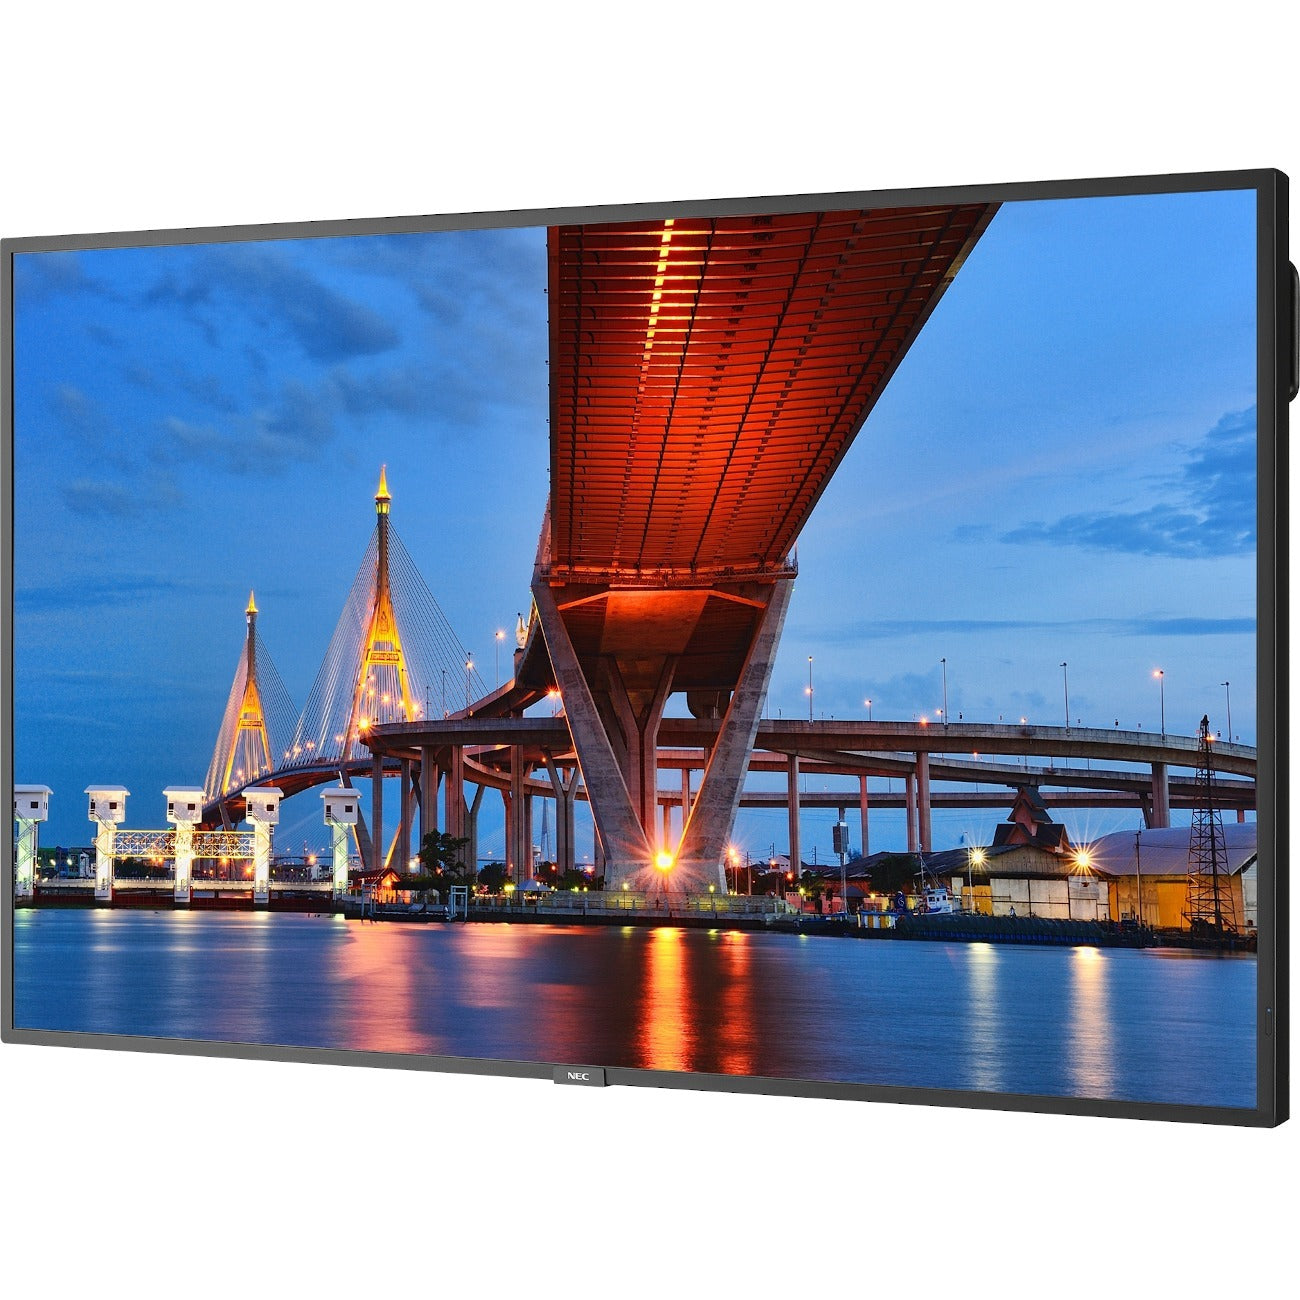 NEC Display 65" Ultra High Definition Commercial Display with Built-In Intel PC - ME651-PC5